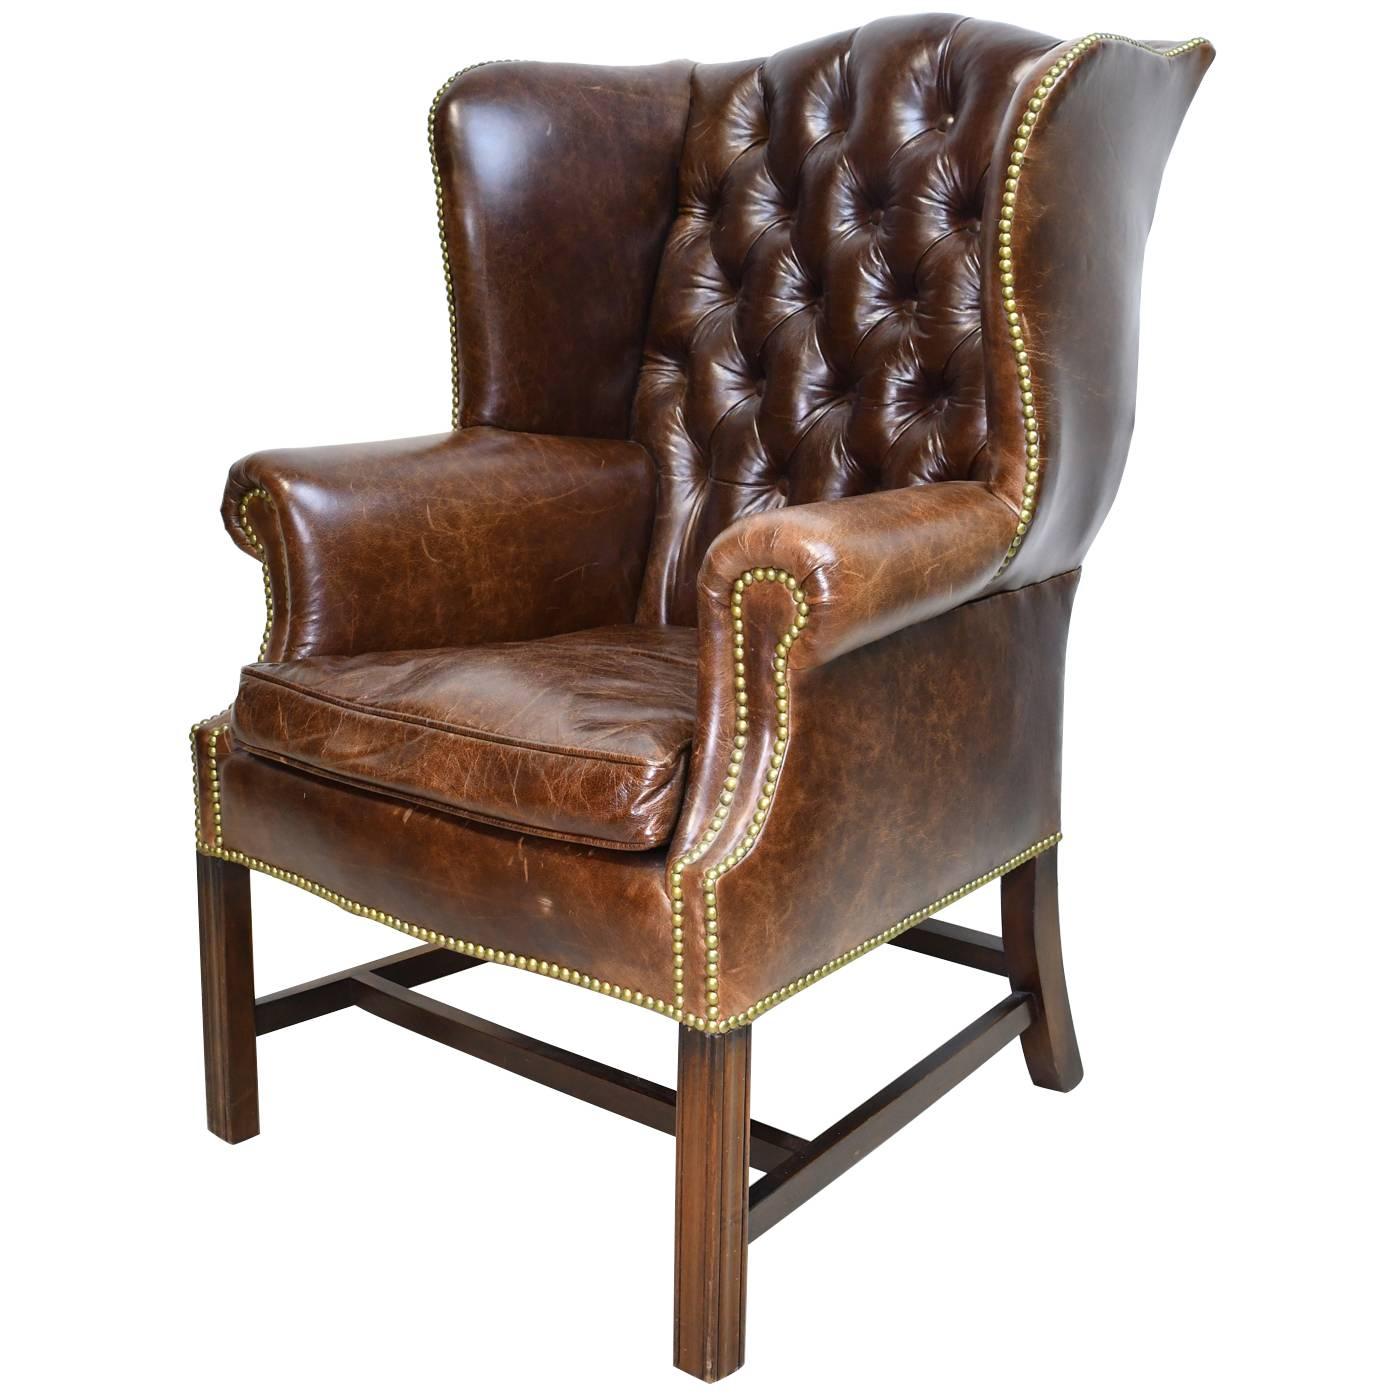 A classic English-style Chesterfield wing-back chair upholstered in a medium brown leather (milk chocolate color) with tufted back & brass decorative nail heads around the silhouette. Chair rests on square Marlboro front legs & splayed back legs